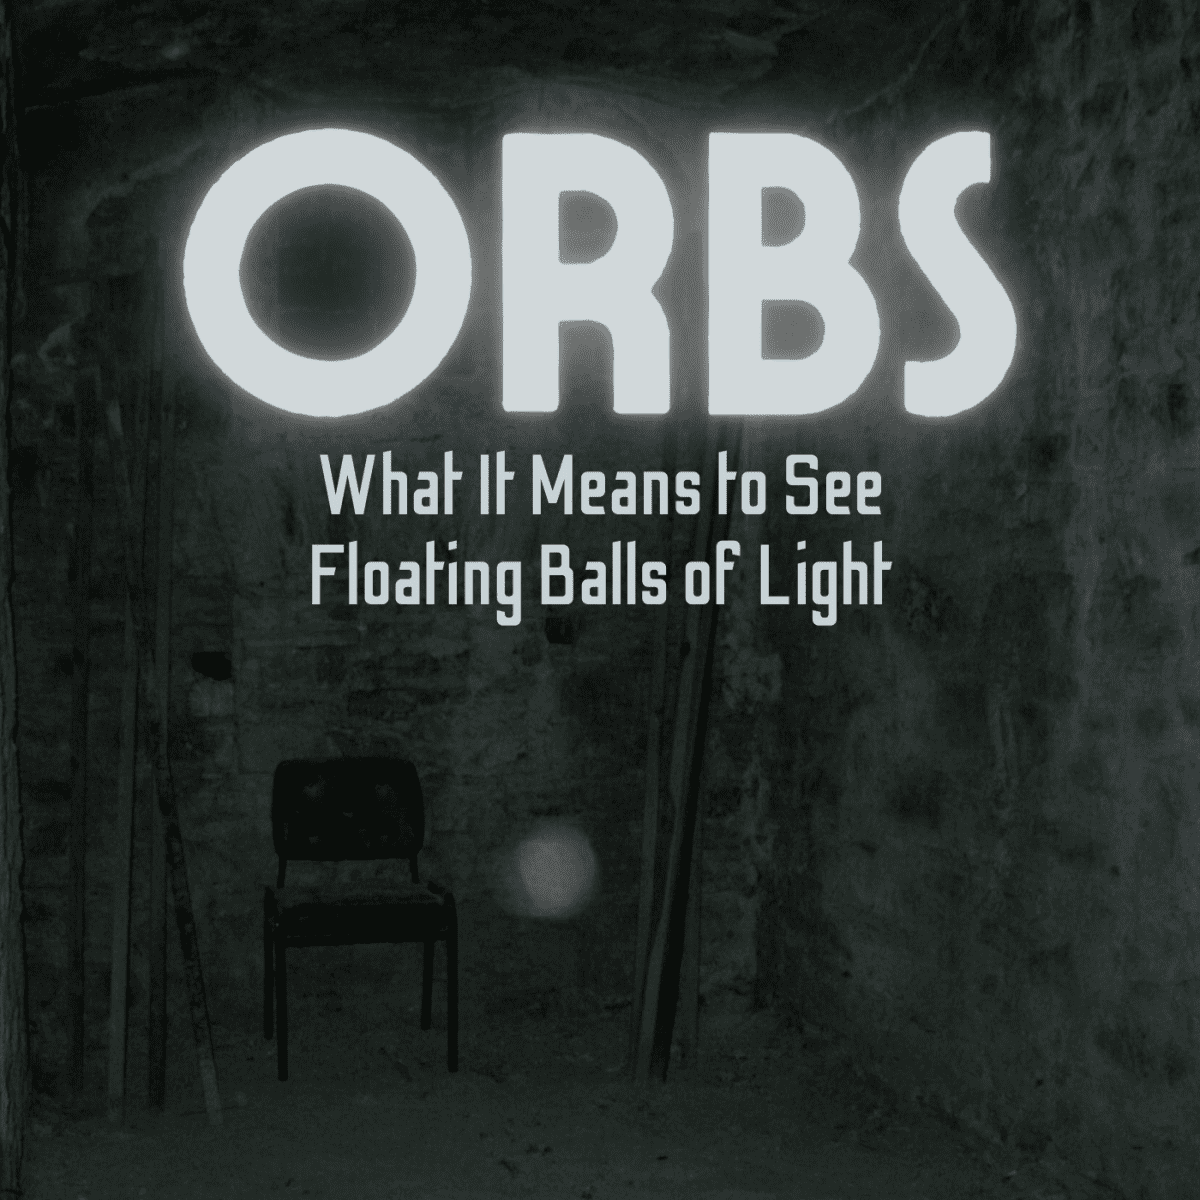 Seeing Orbs With the Naked Eye - Exemplore